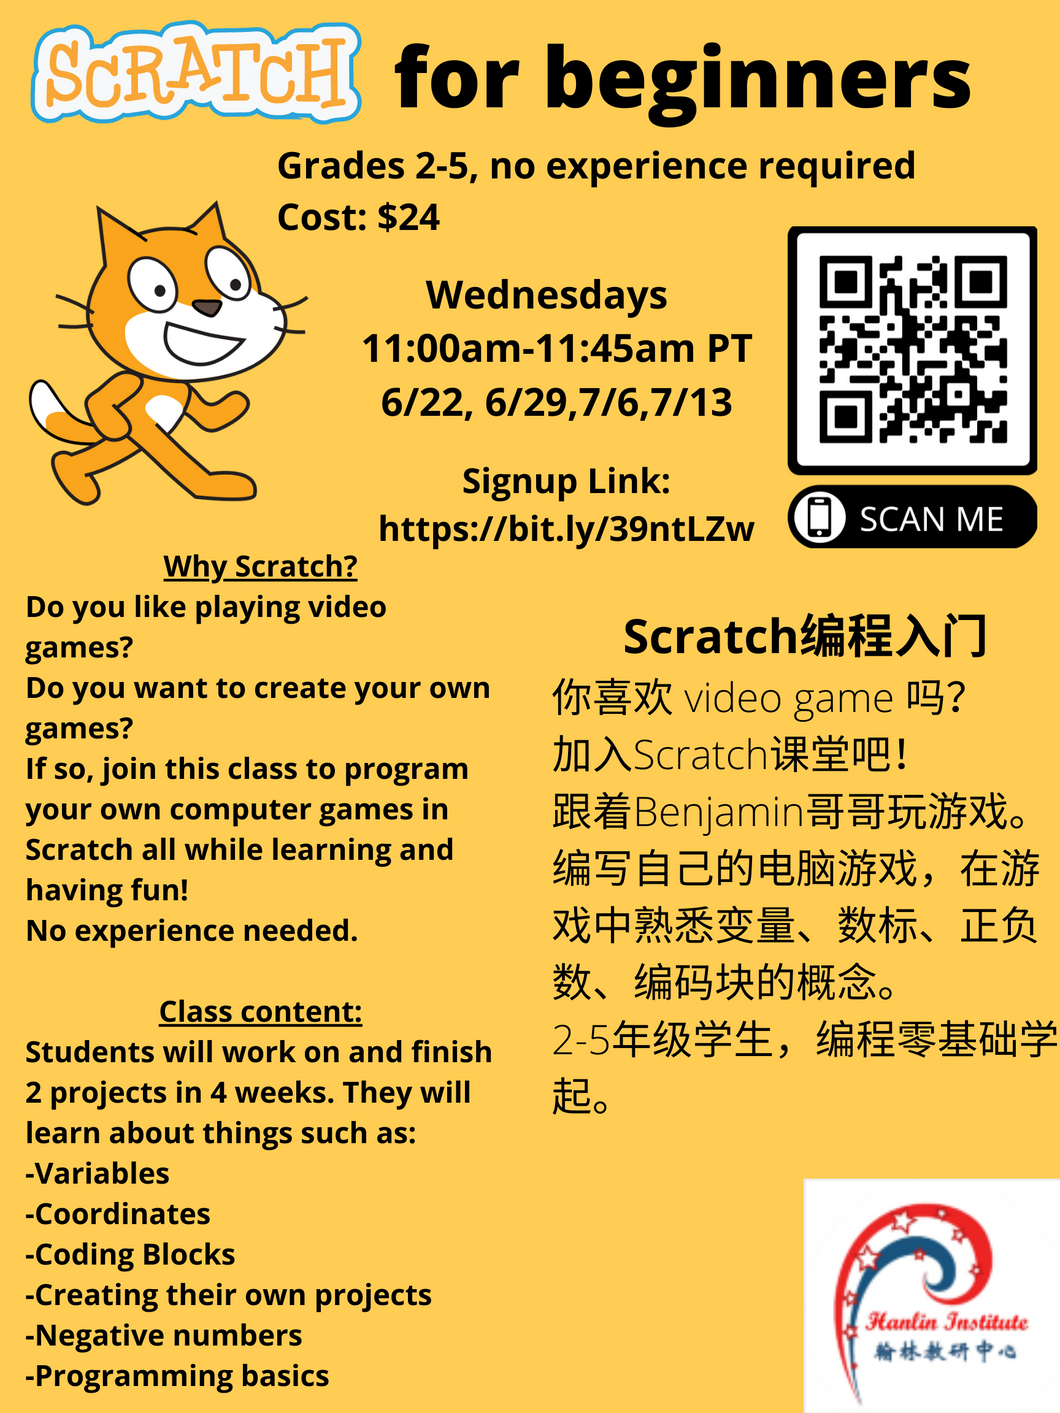 Scratch for beginners, Grades 2-5, no experience required. Do you like playing video games?  Do you want to create your own games?